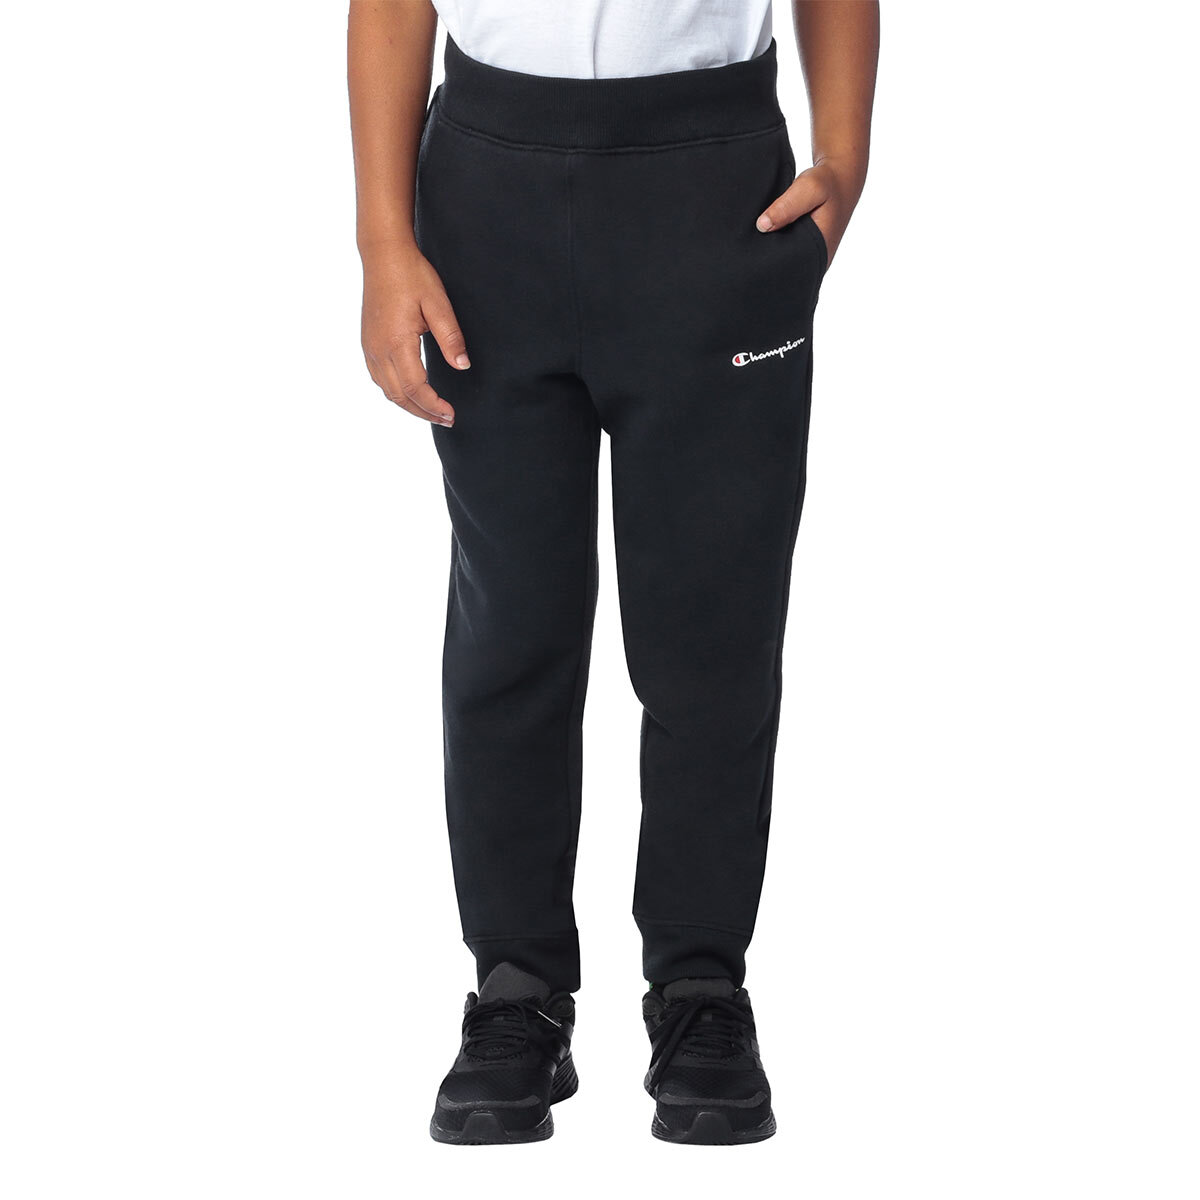 Front lifestyle image of boys joggers